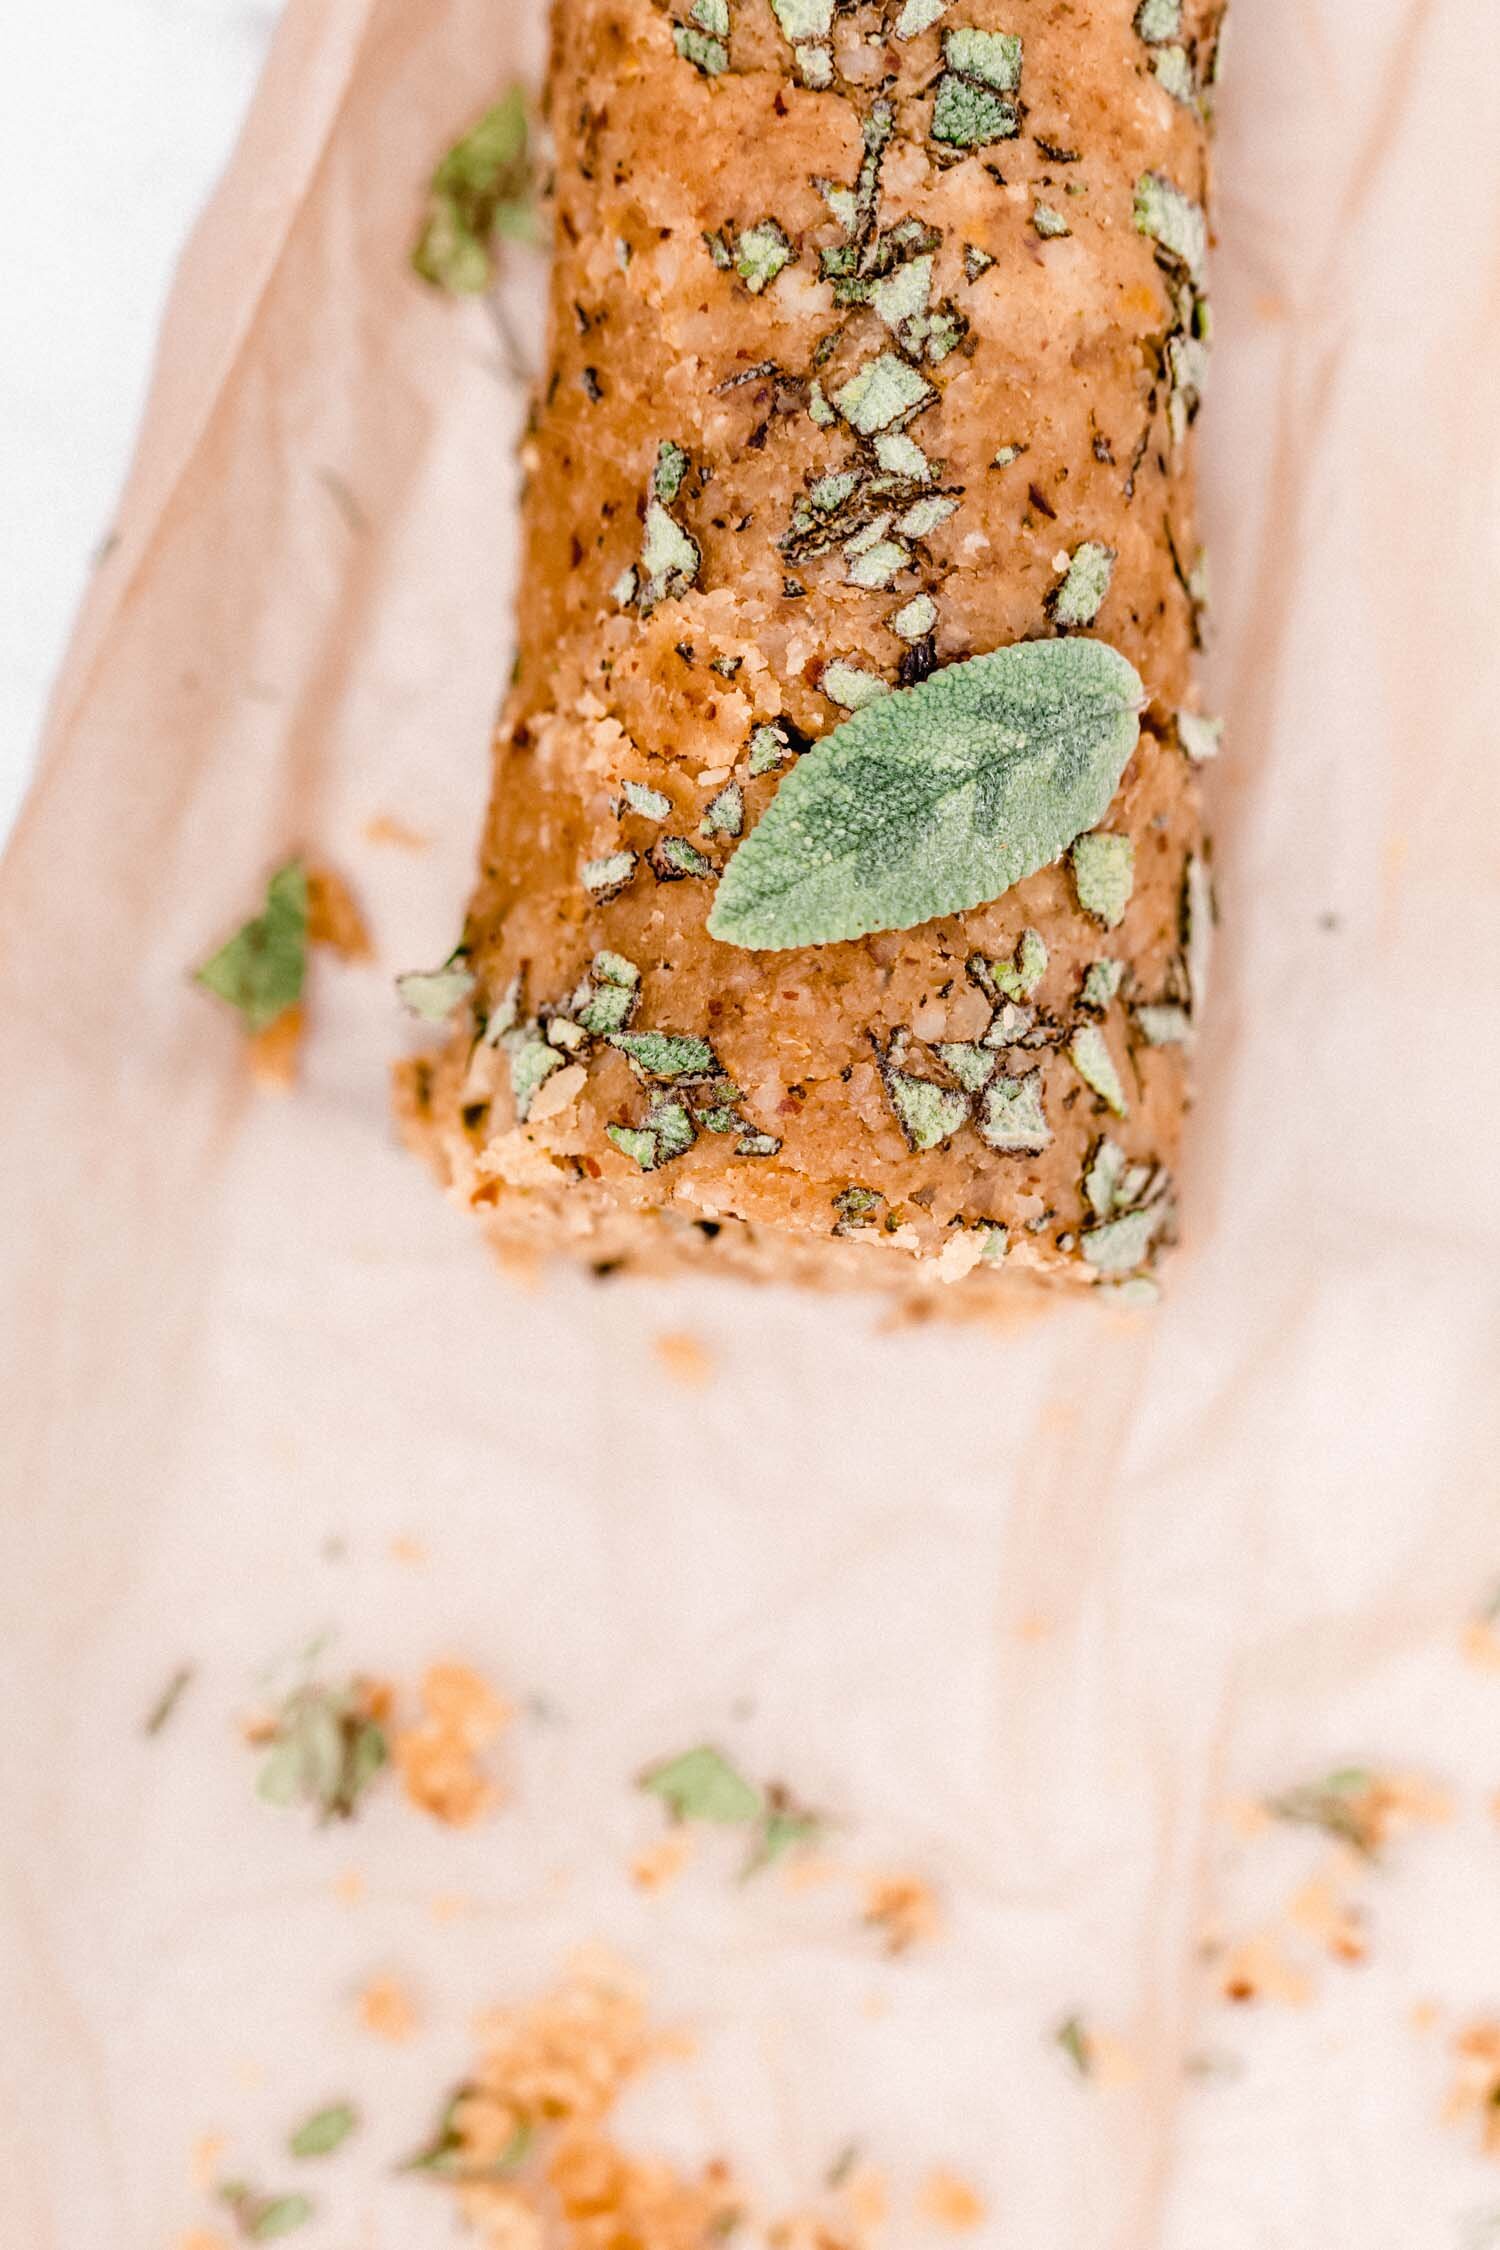 Easy Brazil Nut Vegan Cheese Log only requires about 10 minutes of hands-on time and is deliciously flavored with brazil nuts rosemary, lemon, and kalamata olives. #vegancheese #dairyfree #cheeselog #glutenfree #holidayfood #snack #appetizer #vegan #rosemary #brazilnut